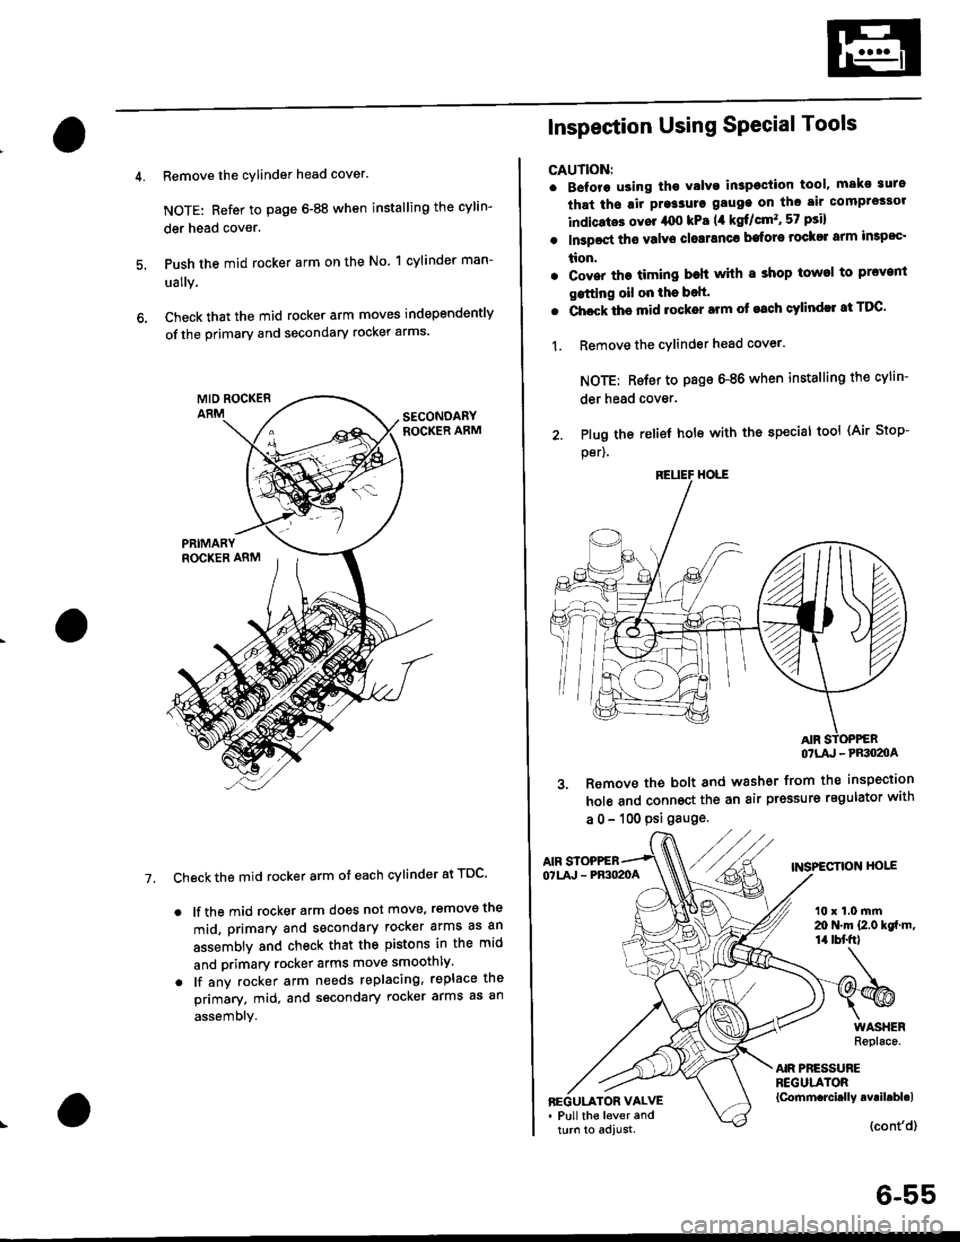 HONDA CIVIC 1997 6.G Workshop Manual Remove the cylinder head cover.
NOTE: Refer to page 6-88 when installing the cylin-
der head cover.
Push the mid rocker arm on the No. 1 cylinder man-
ually.
Check that the mid rocker arm moves indepe